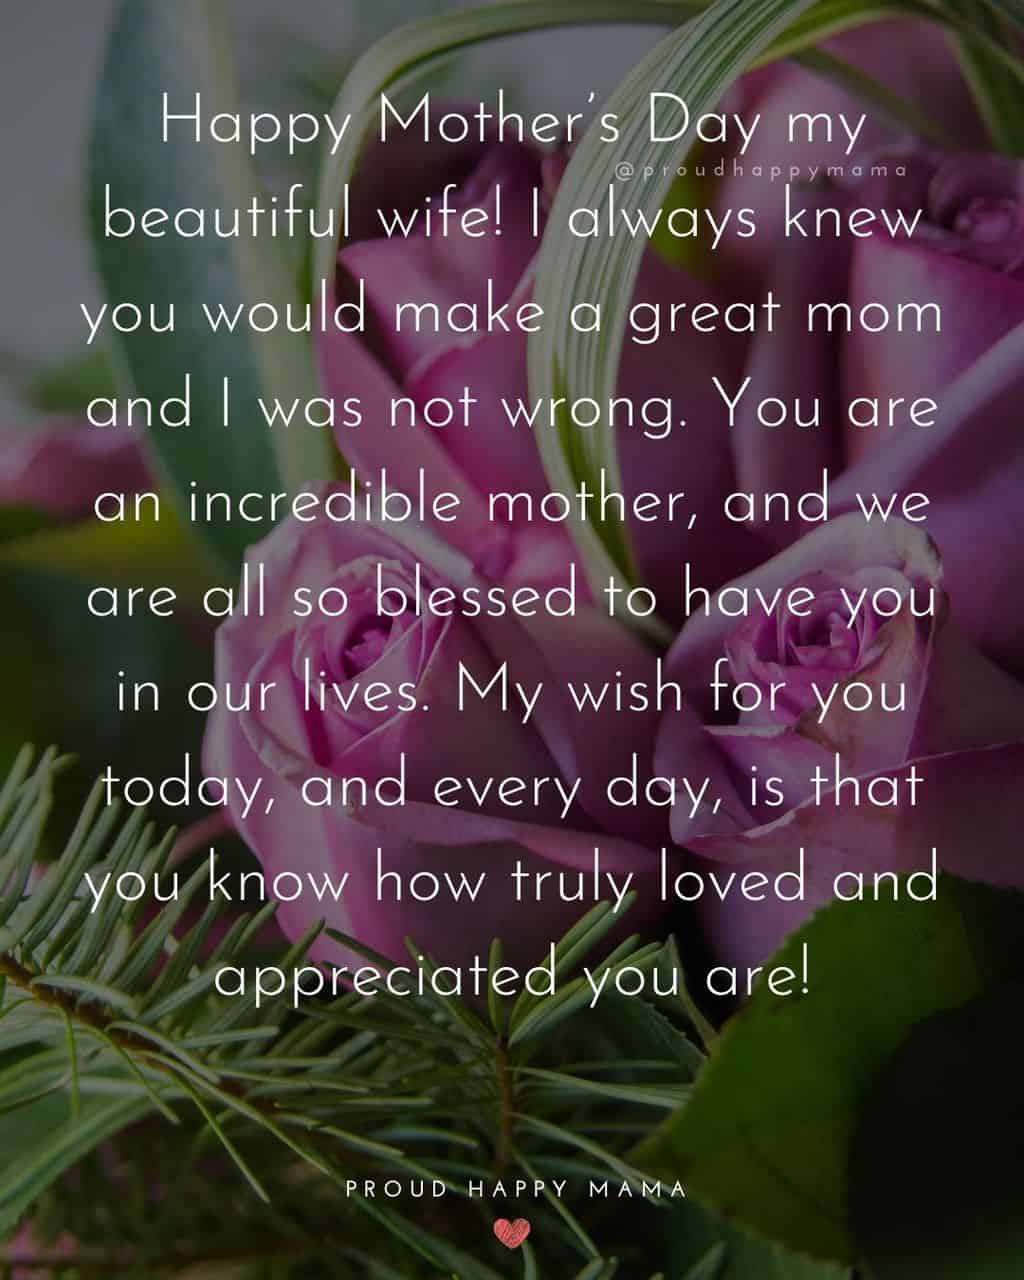 Happy Mothers Day Quotes For Wife - Happy Mother’s Day my beautiful wife! I always knew you would make a great mom and I